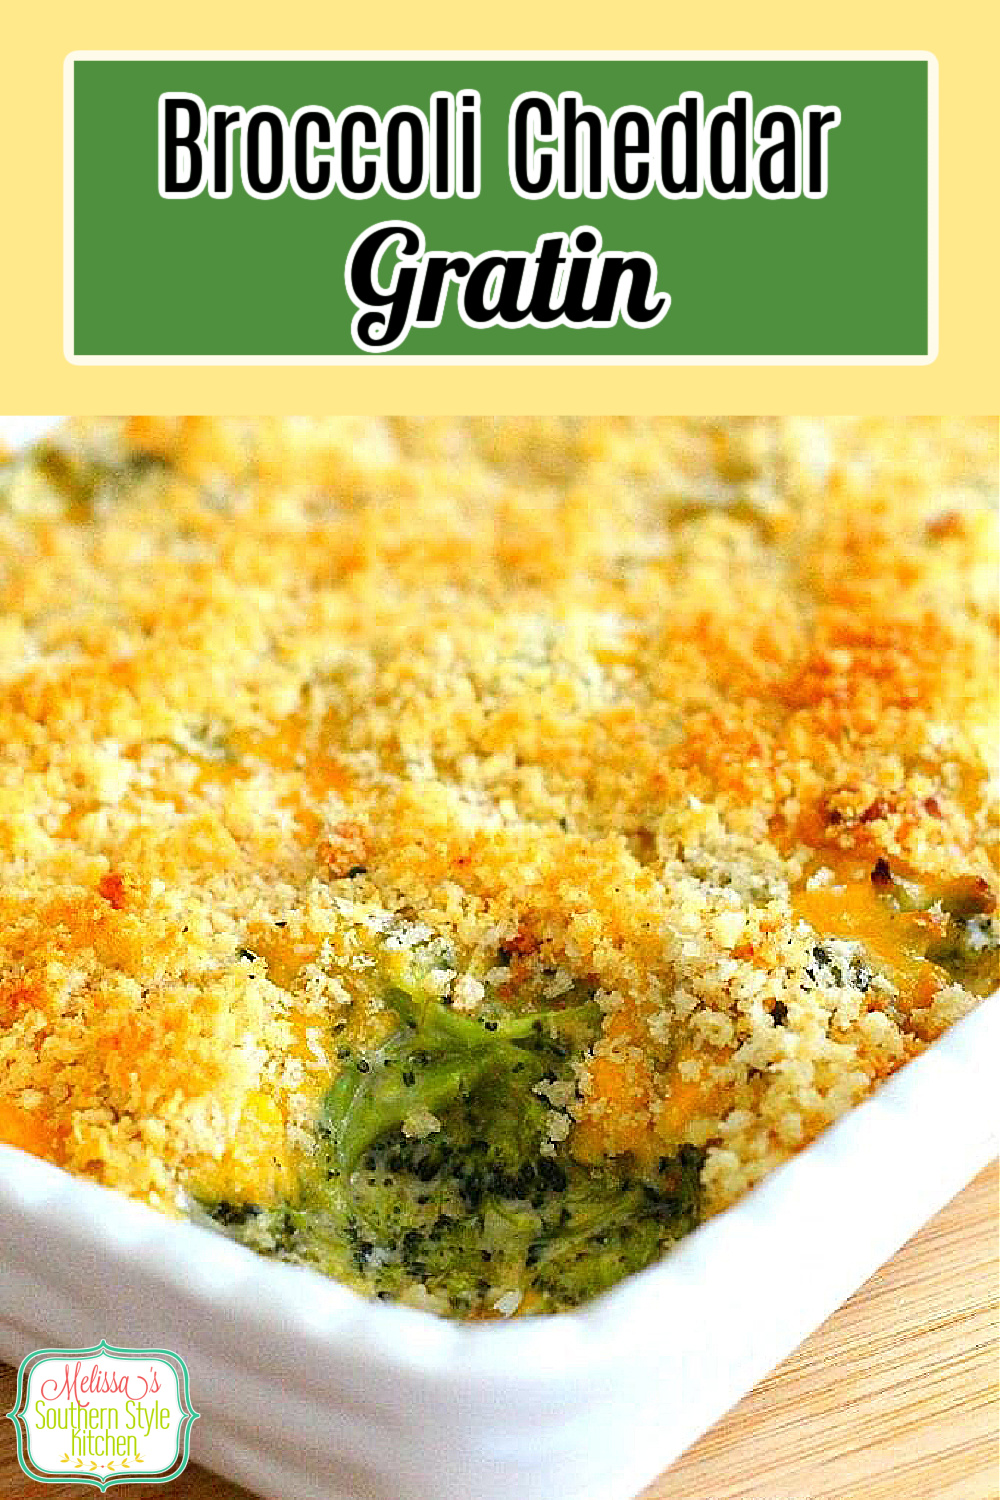 This scratch made Broccoli Cheddar Gratin is a delicious side dish perfect for any occasion #broccolicheddar #broccolicasserole #broccolicheese #sidedishrecipes #broccolicasserole #southernrecipes #broccolirecipes #homemadebroccolicasserole #easysidedishes